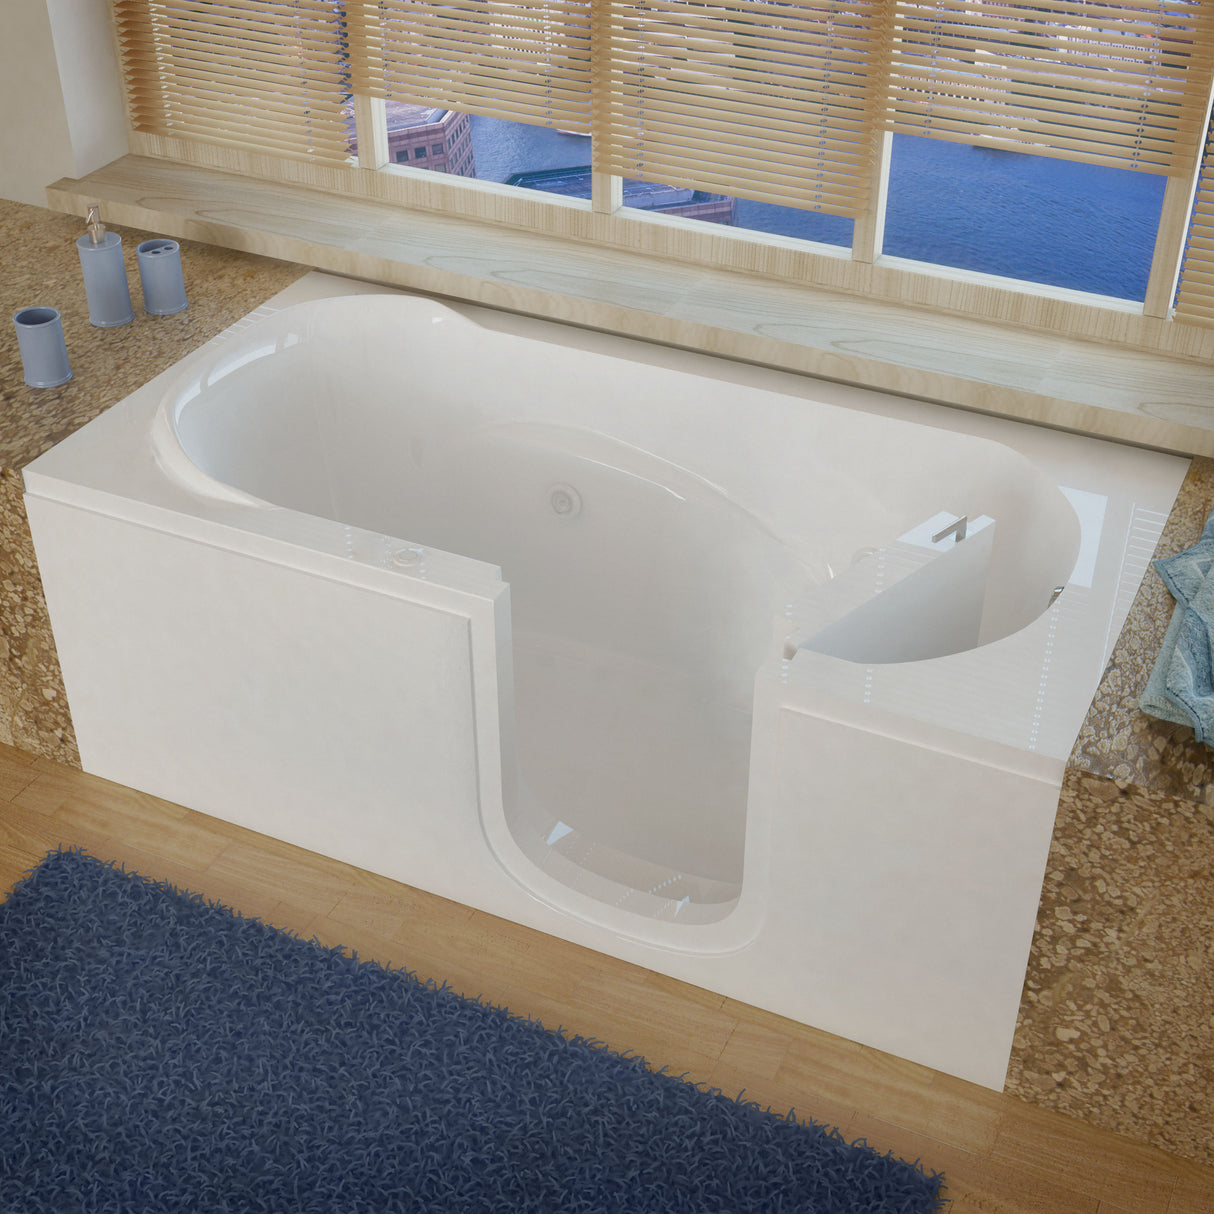 MediTub Step-In 30 x 60 Right Drain White Whirlpool Jetted Step-In Bathtub